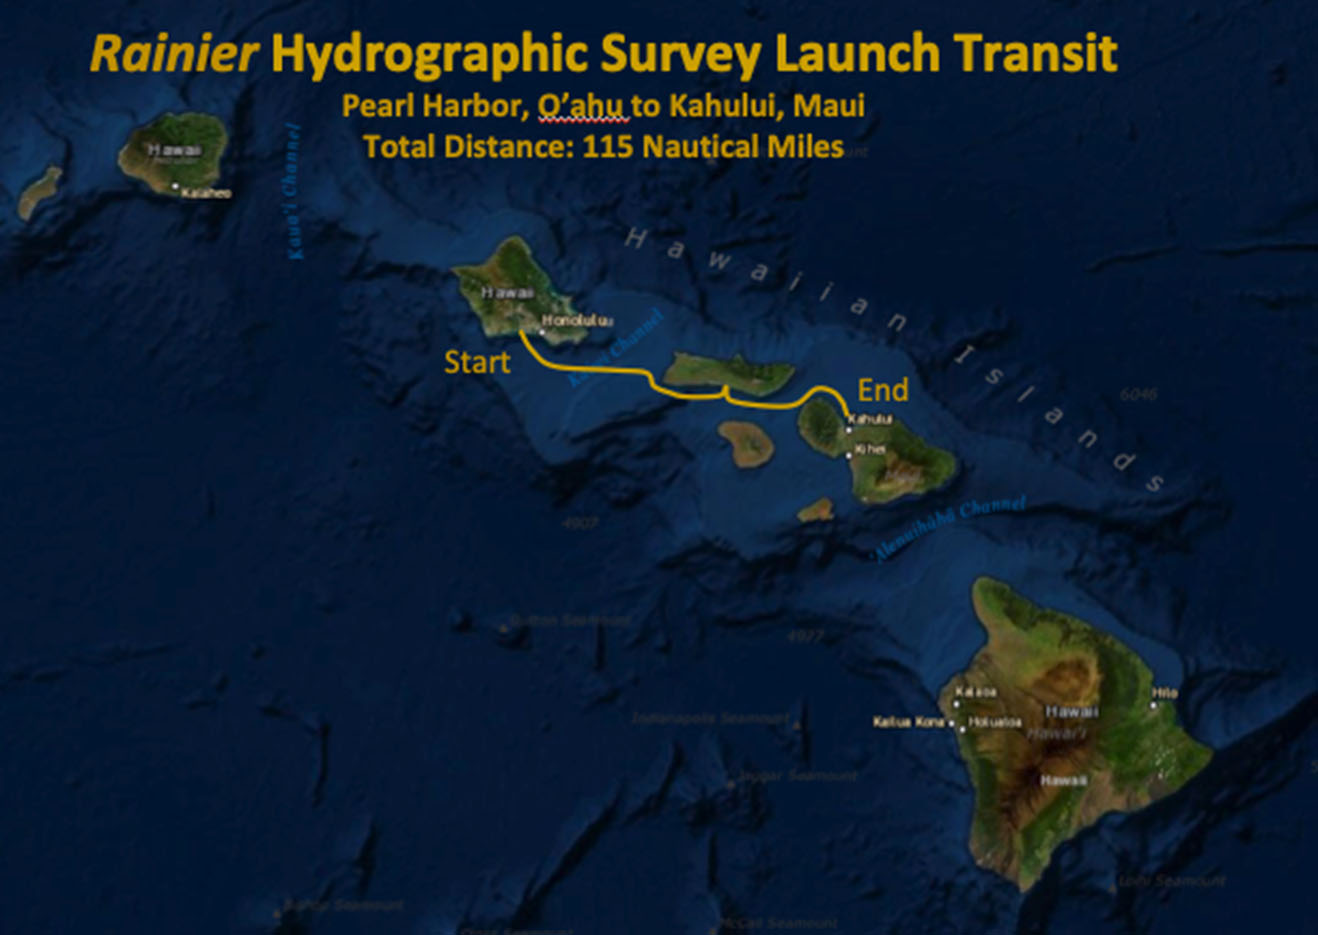 Map of the survey launches route from Pearl Harbor, O’ahu to Kahului, Maui.